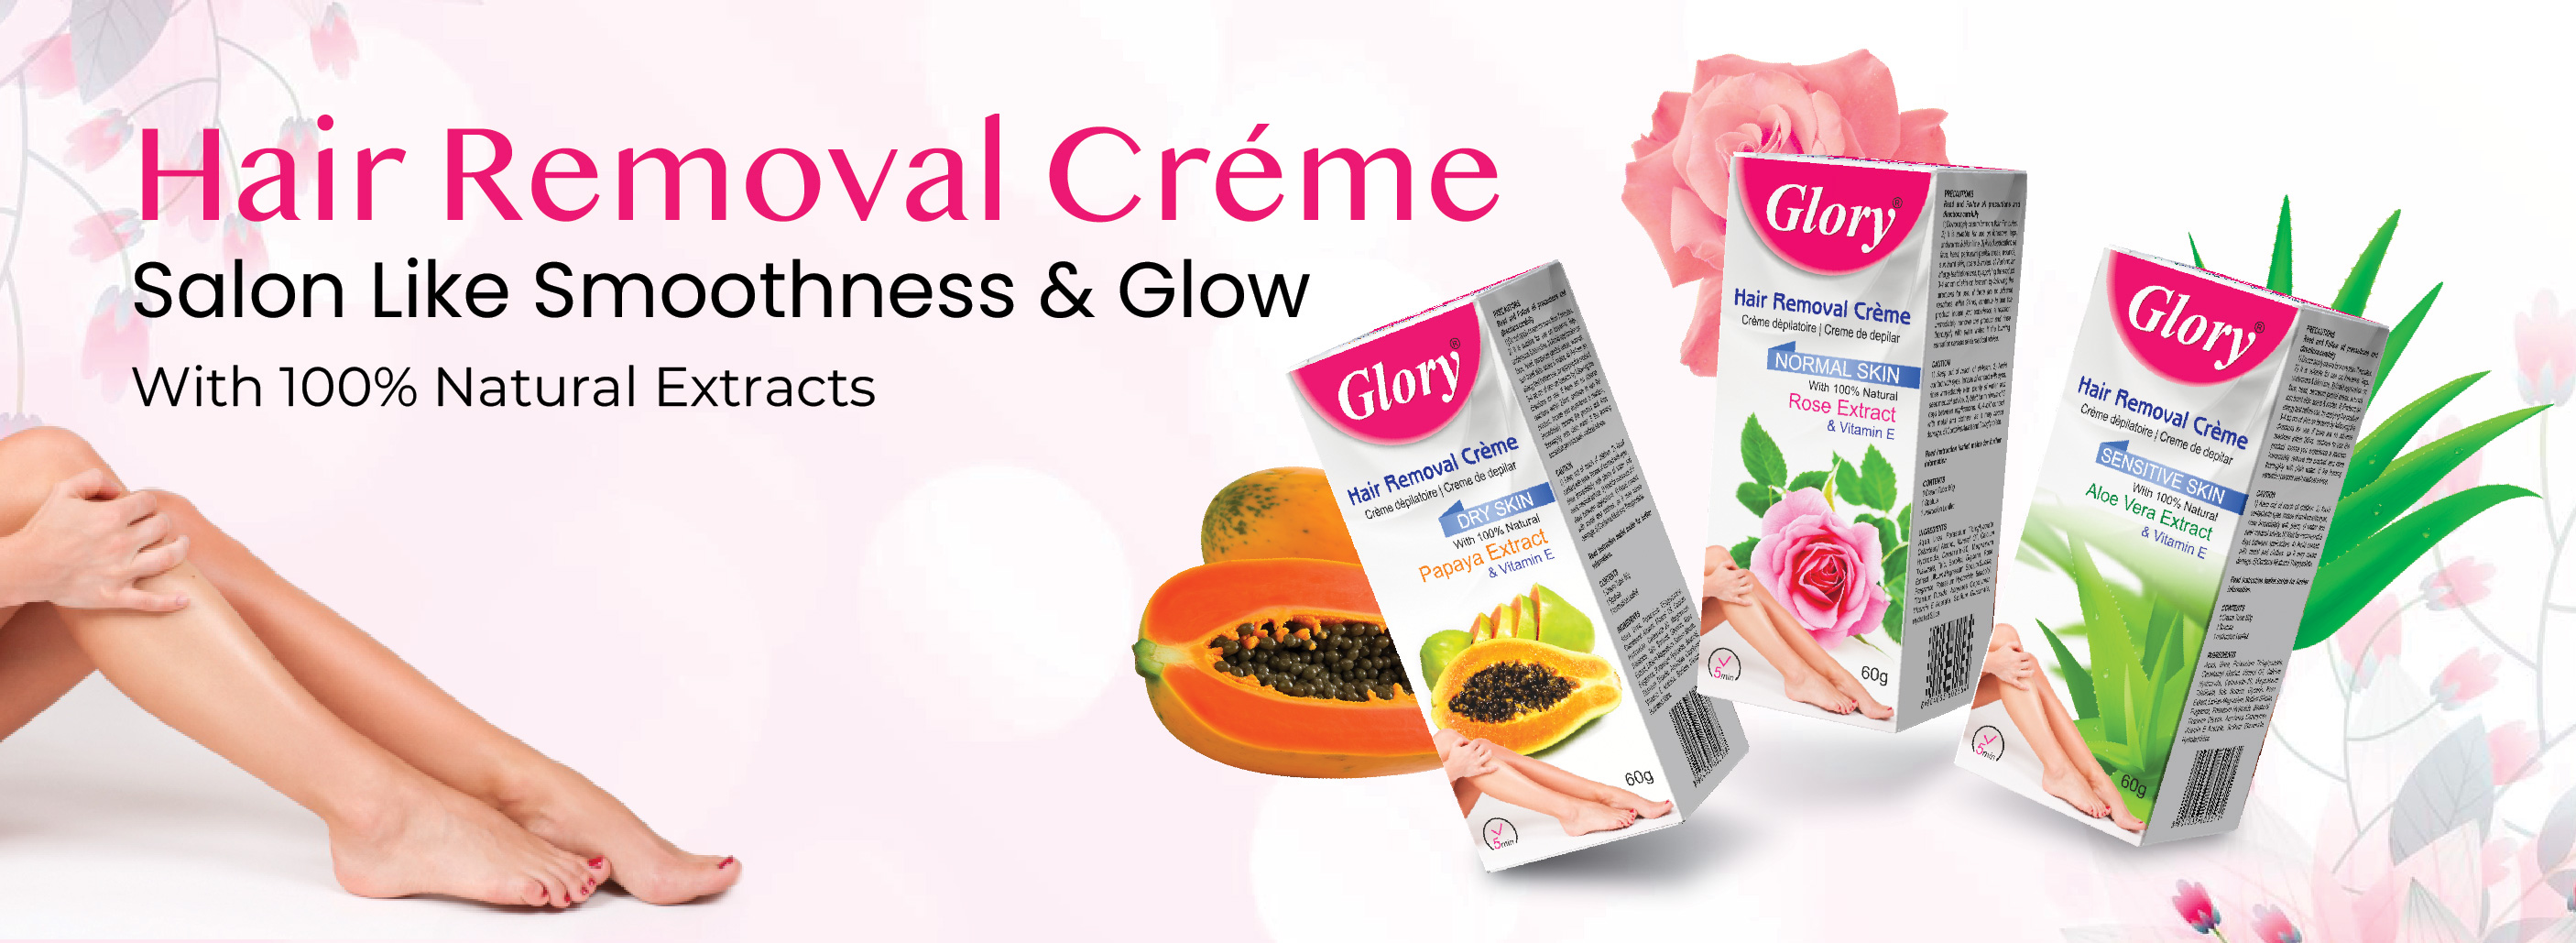 Hair Removal Creme Manufacturer | Hair Removal Creme Manufacturer in India